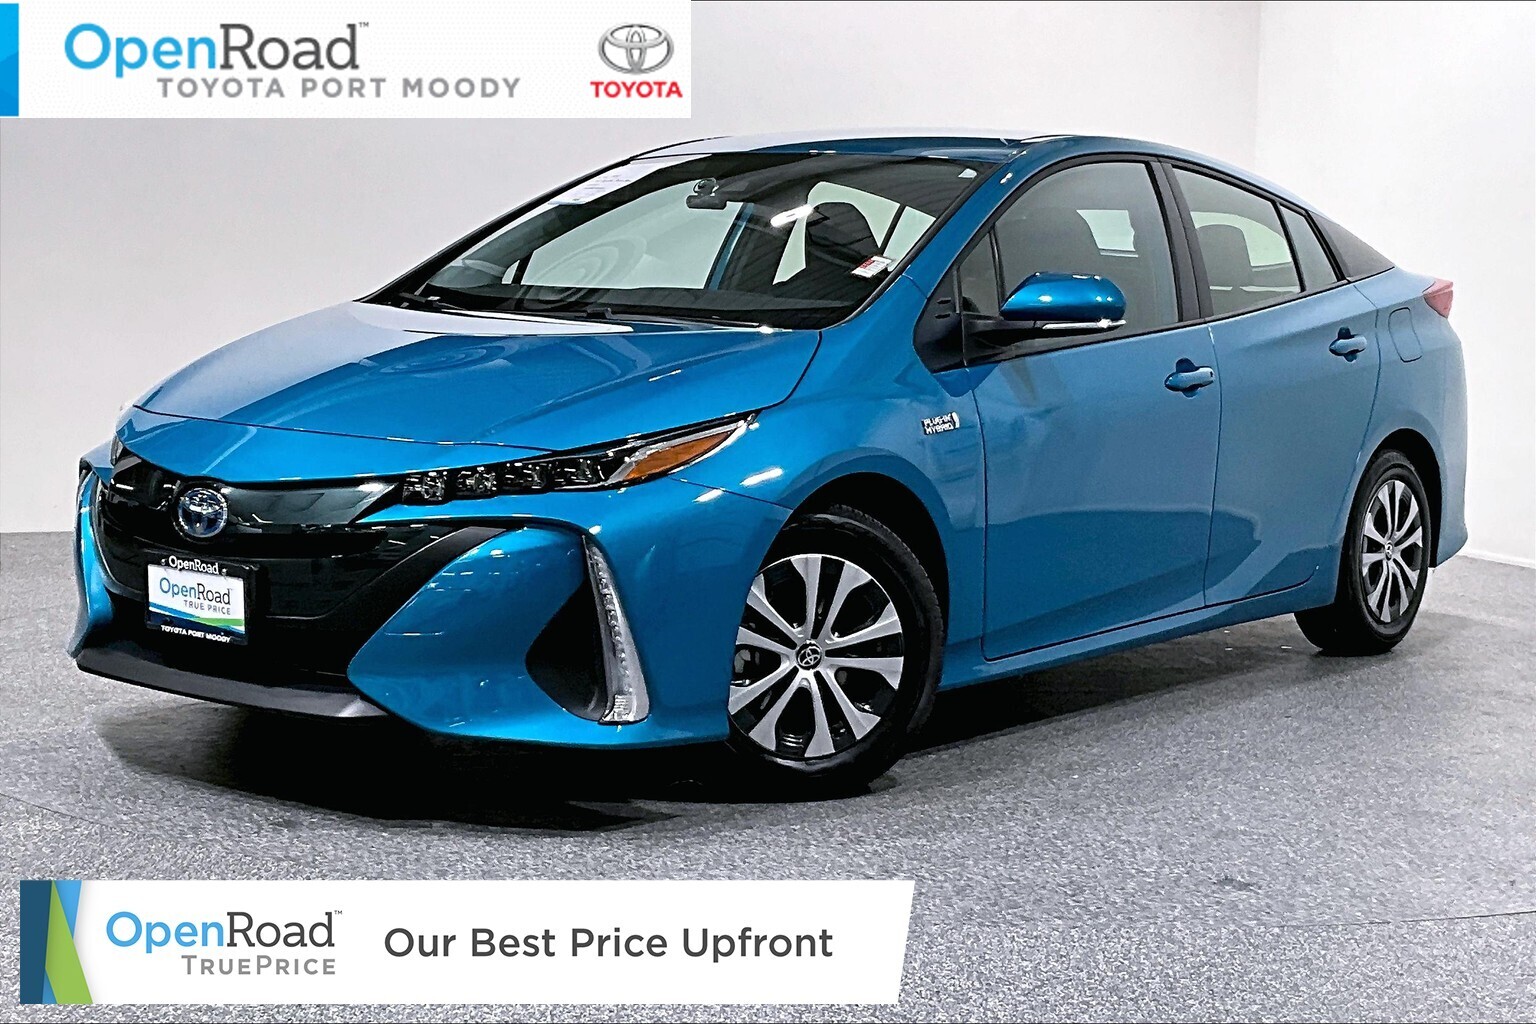 2022 Toyota Prius Prime |OpenRoad True Price |Local |One Owner |No Claims 